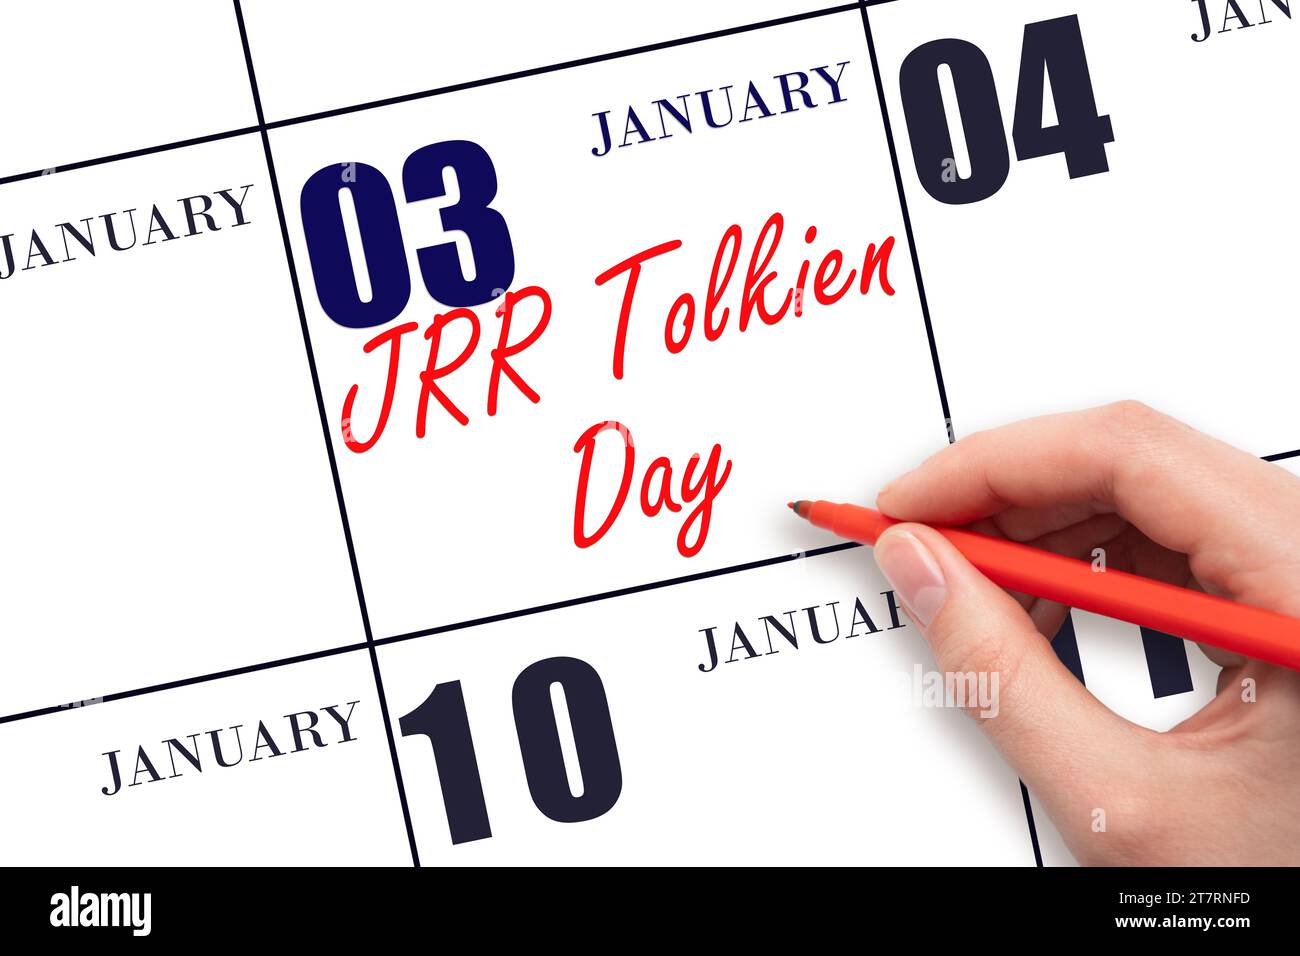 January 3. Hand writing text JRR Tolkien Day on calendar date. Save the date. Holiday.  Day of the year concept. Stock Photo